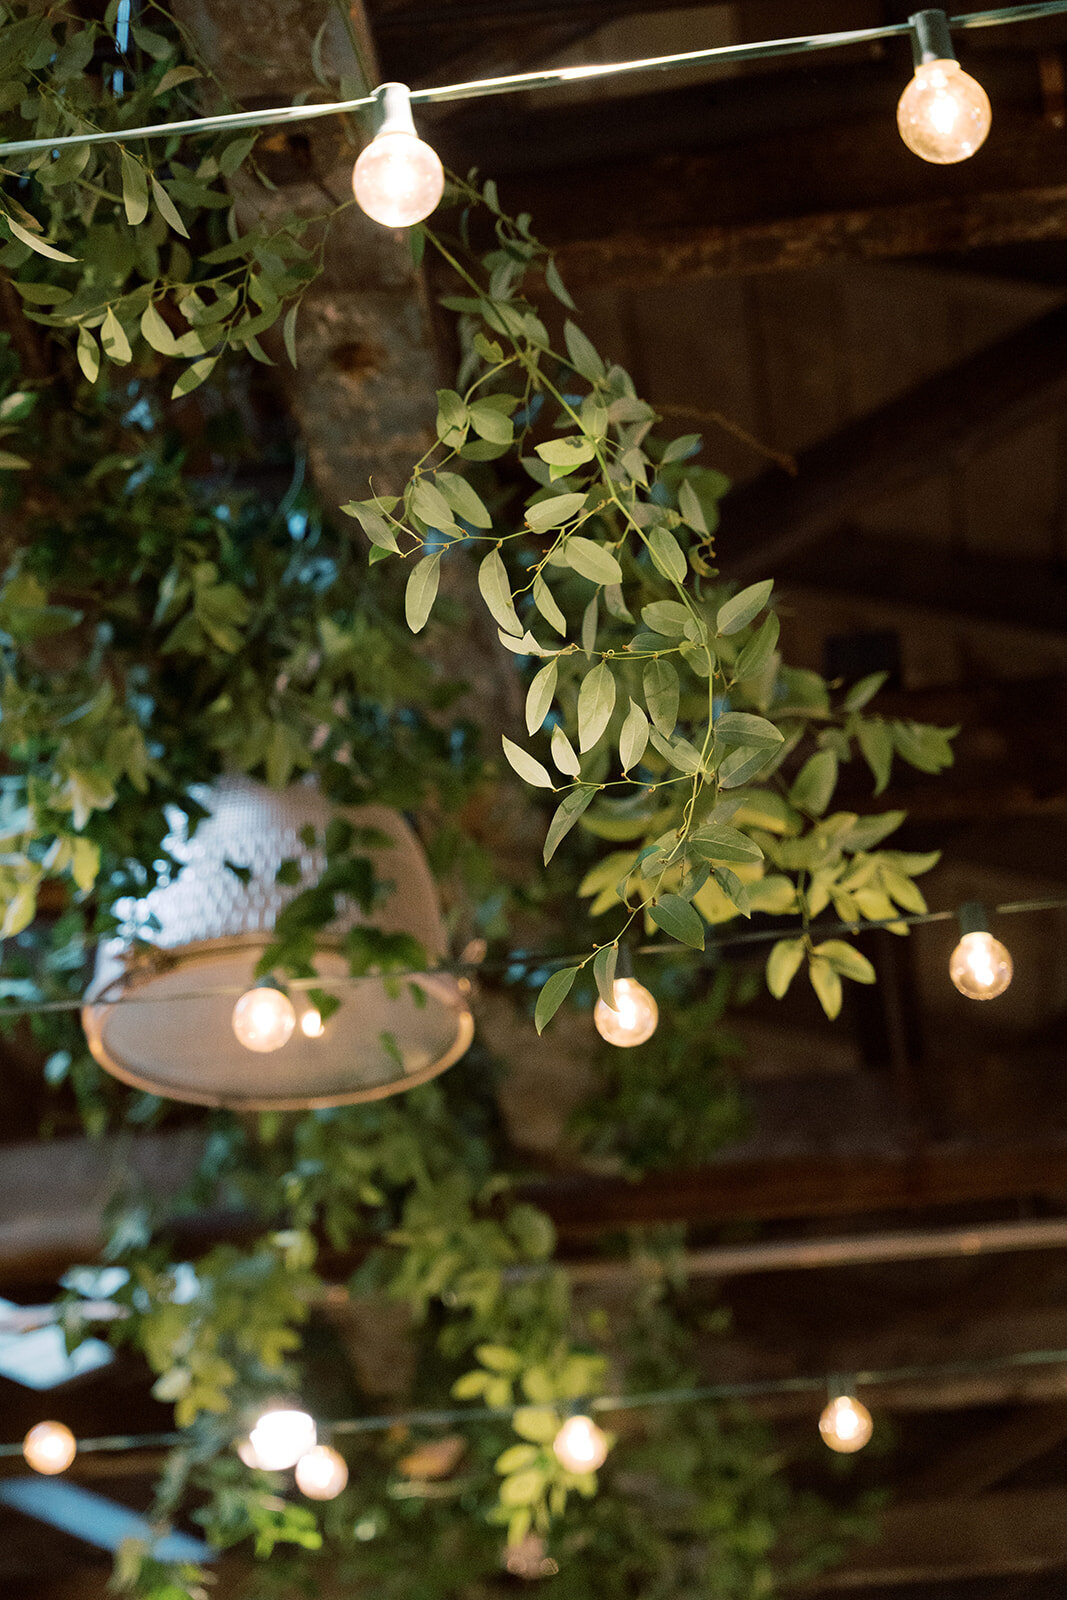 Smilax greenery and string lights in the ceiling at the Washington mill dye house.